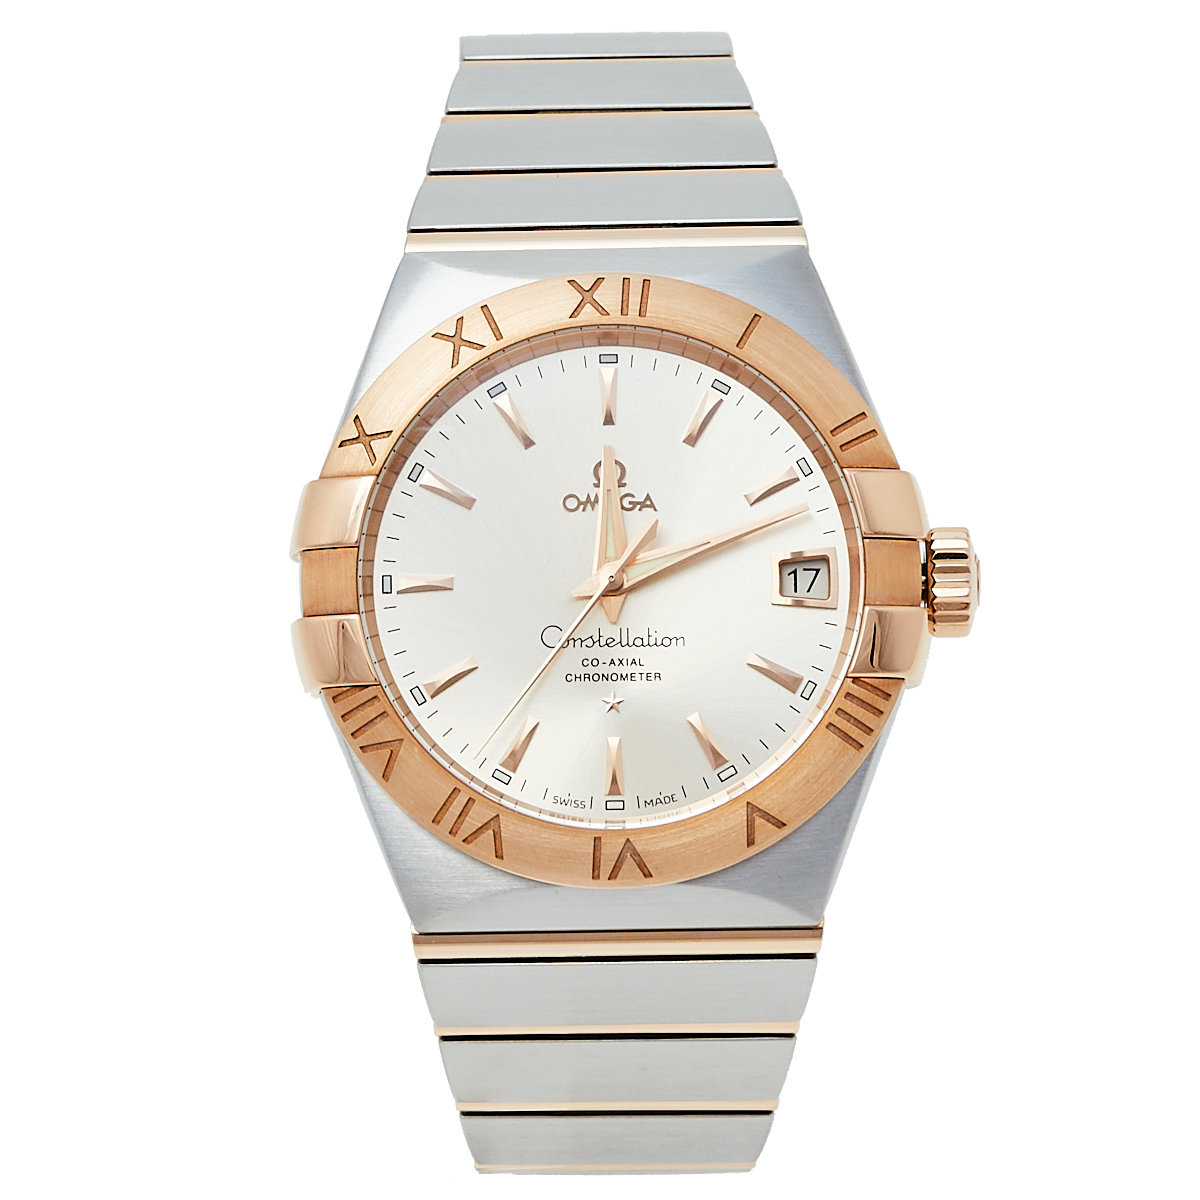 Omega Silver 18K Rose Gold & Stainless Steel Constellation 123.20.38.21.02.001 Men's Wristwatch 38 mm